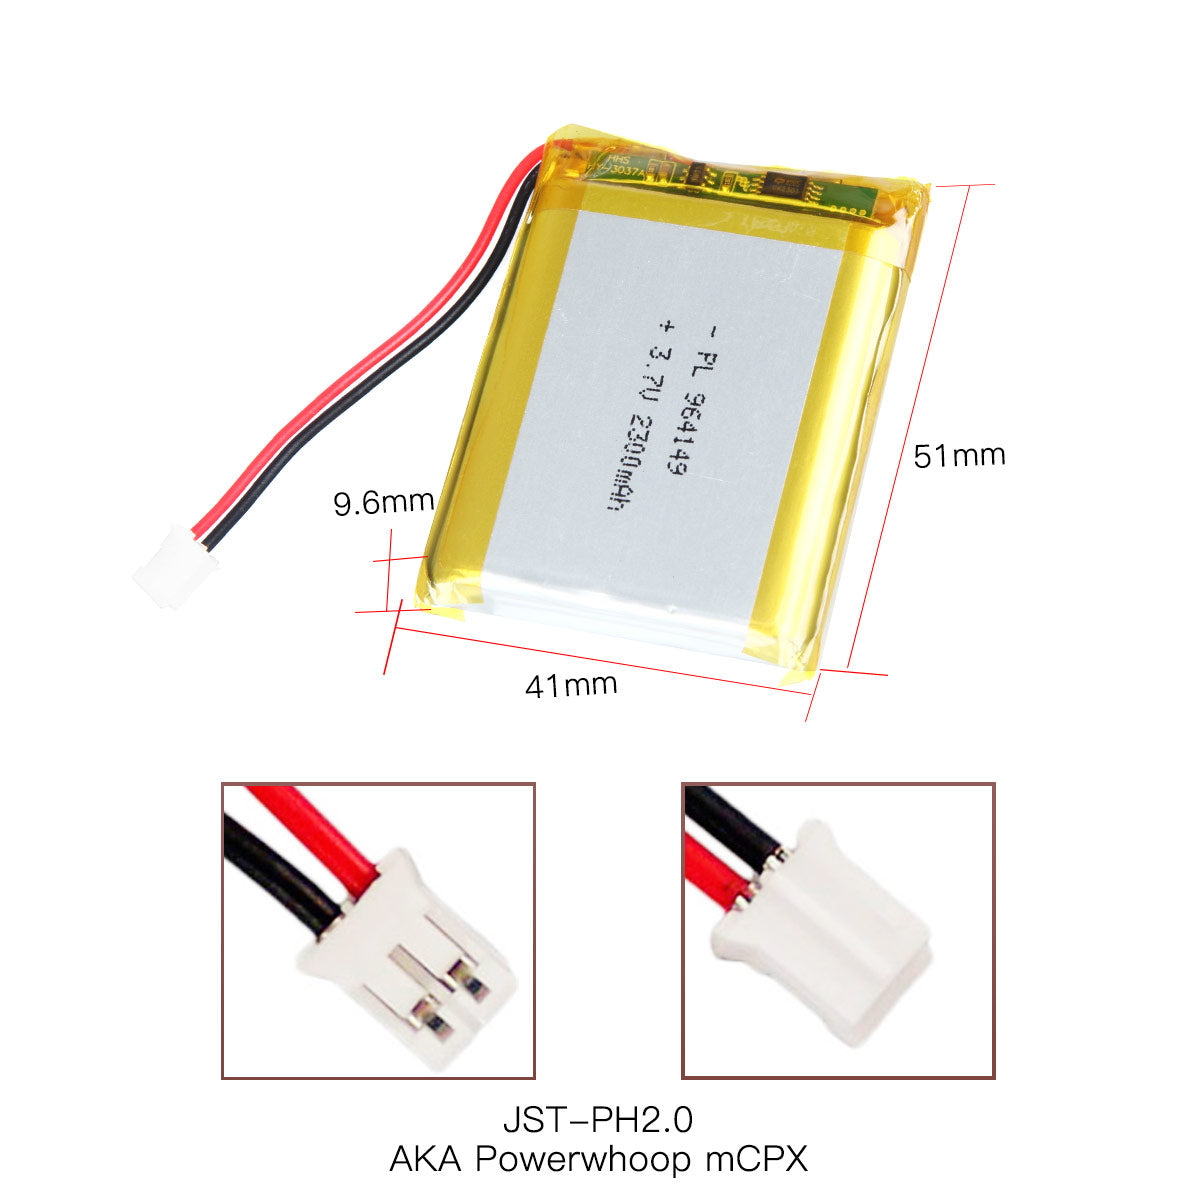 YDL 3.7V 2300mAh 964149 Rechargeable Lithium Polymer Battery Length 51mm